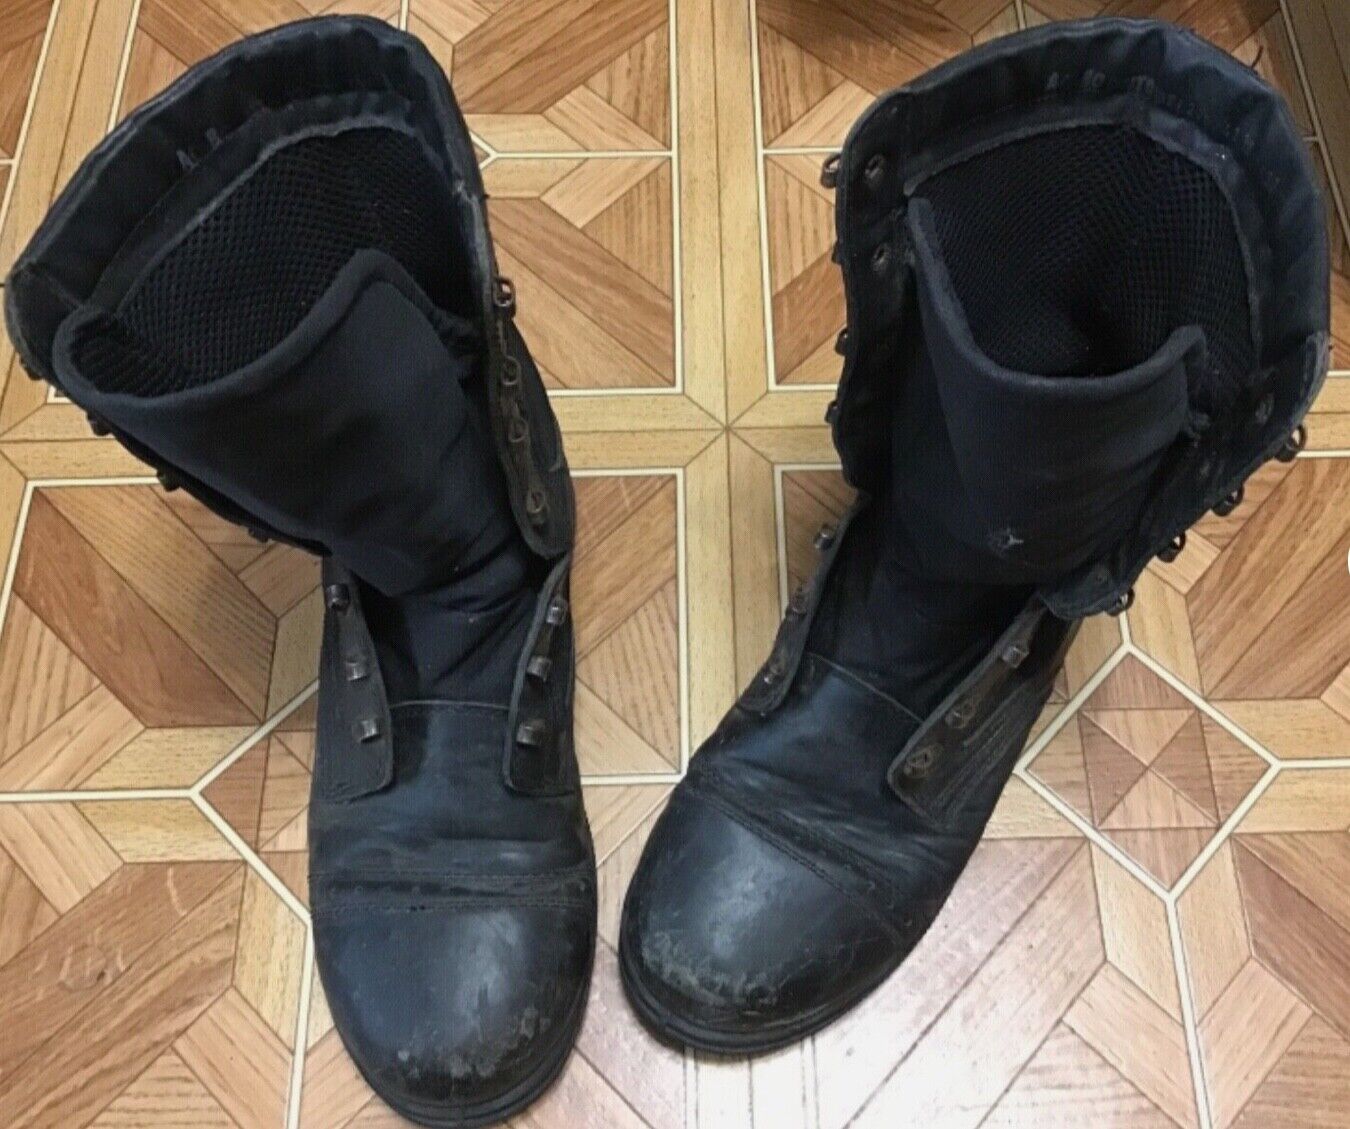 Combat tactical boots of the Russian army. Ukraine 2022-2024